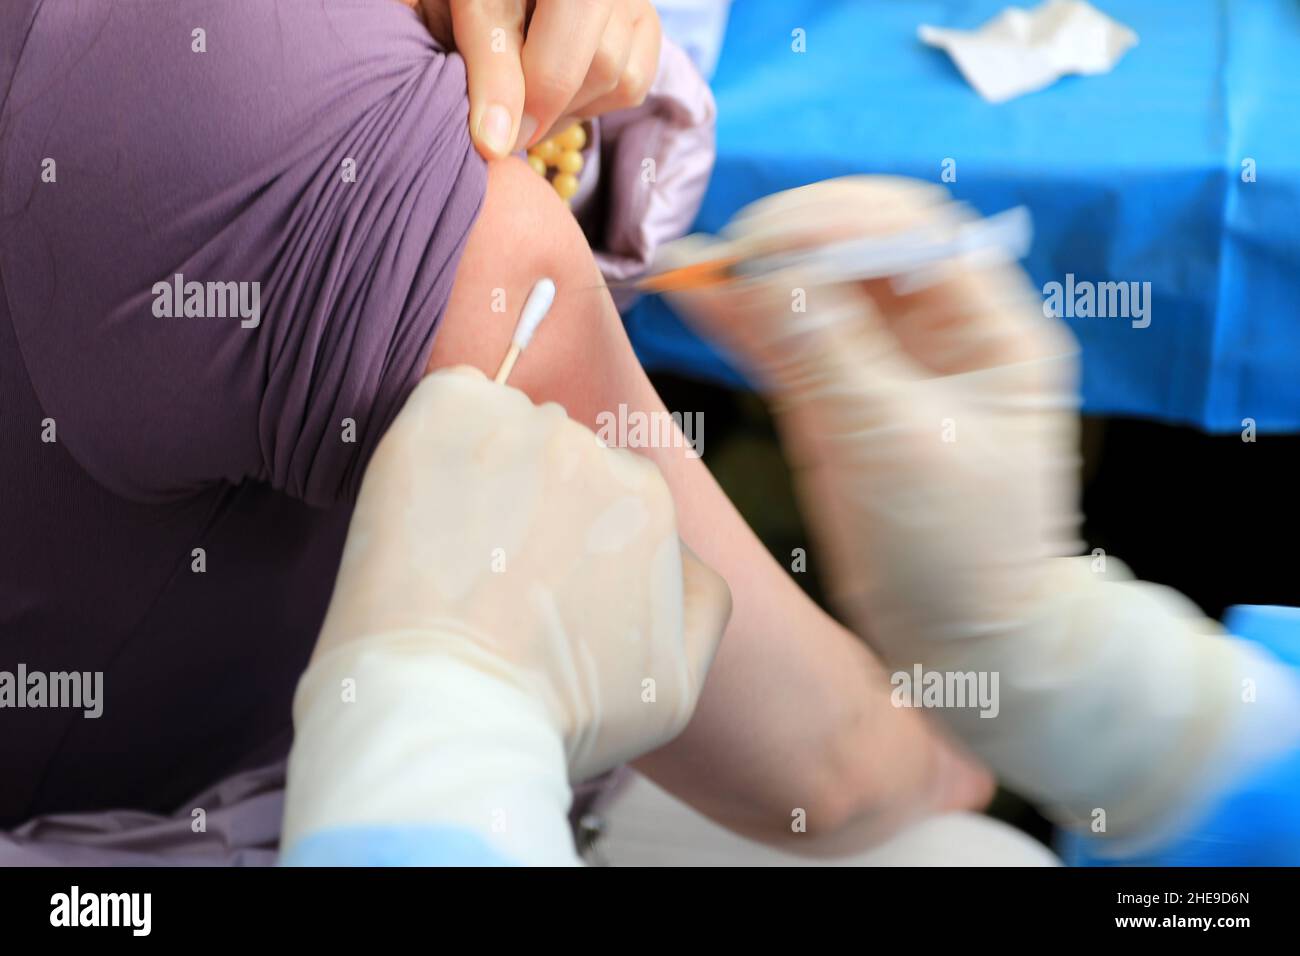 RONGCHENG, CHINA - JANUARY 9, 2022 - A citizen receives booster shots in Rongcheng City, Shandong Province, China, January 9, 2022. By 8 January 2022, Stock Photo